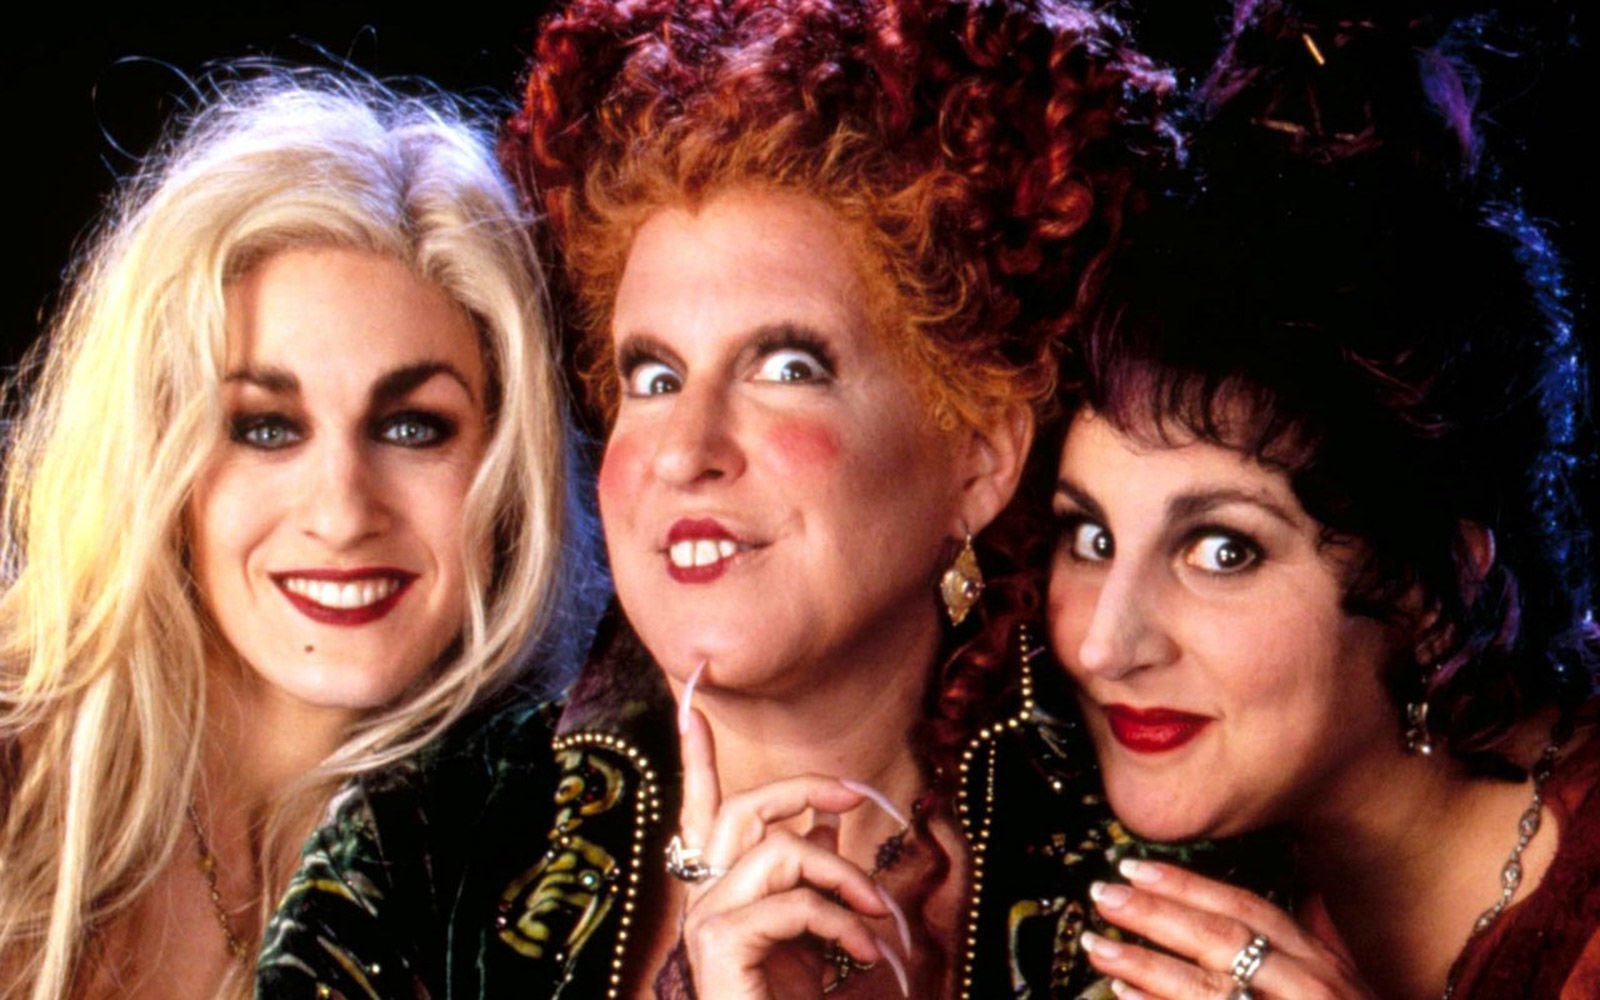 ‘Hocus Pocus’: Where Is the Cast Now? Plus, How Much Are They Worth?